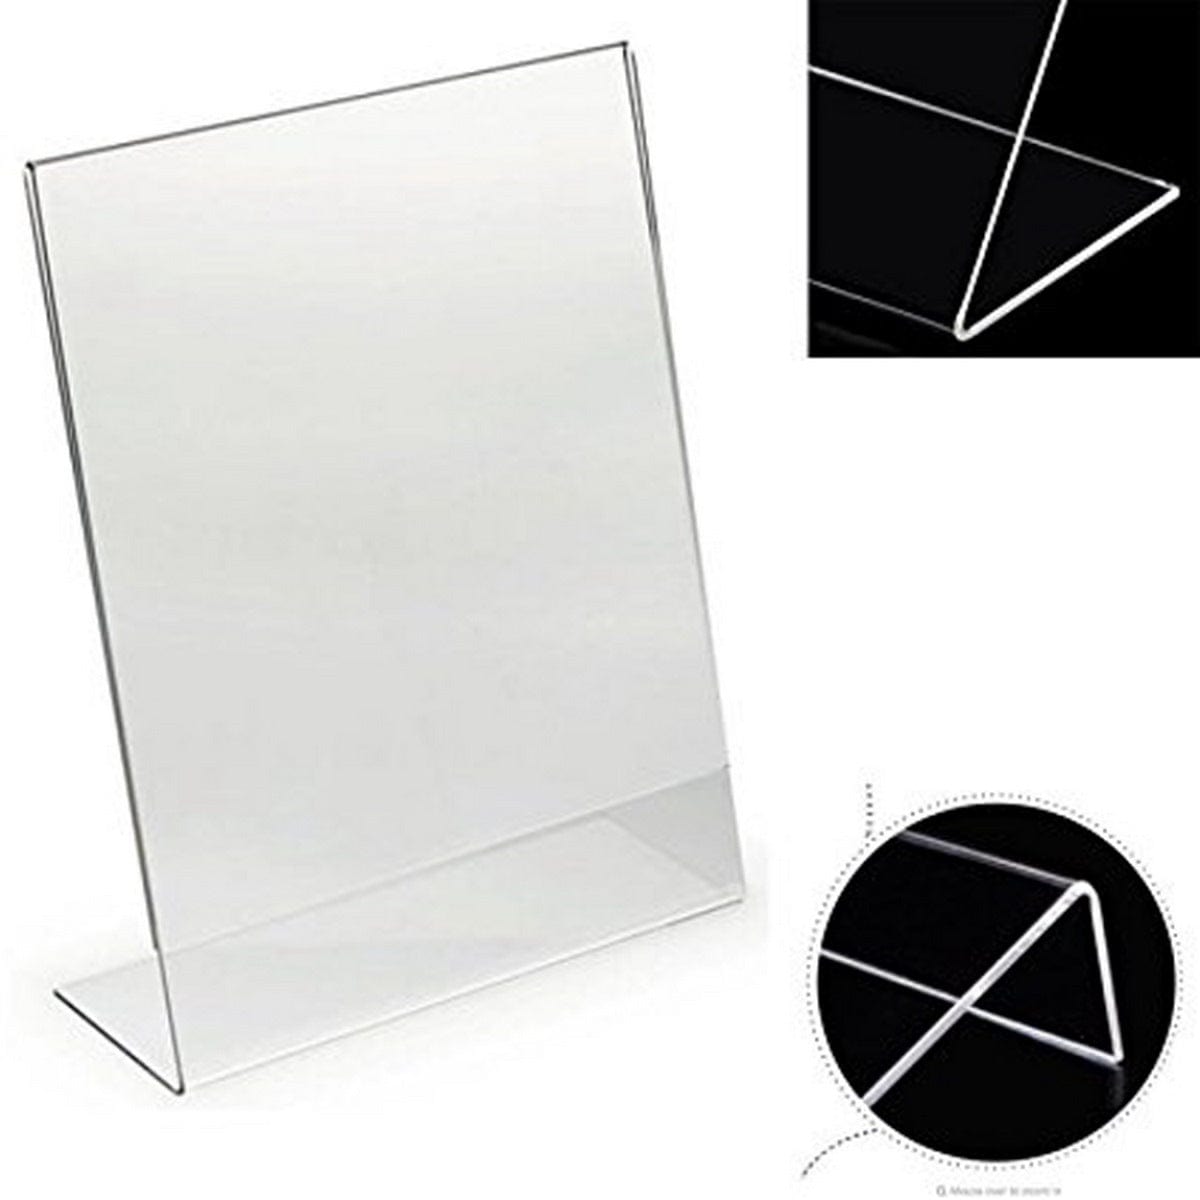 jags-mumbai Acrylic Display Stands Compact and Convenient: The Acrylic Paper Stand for A6 4x6-sized Documents and Photos